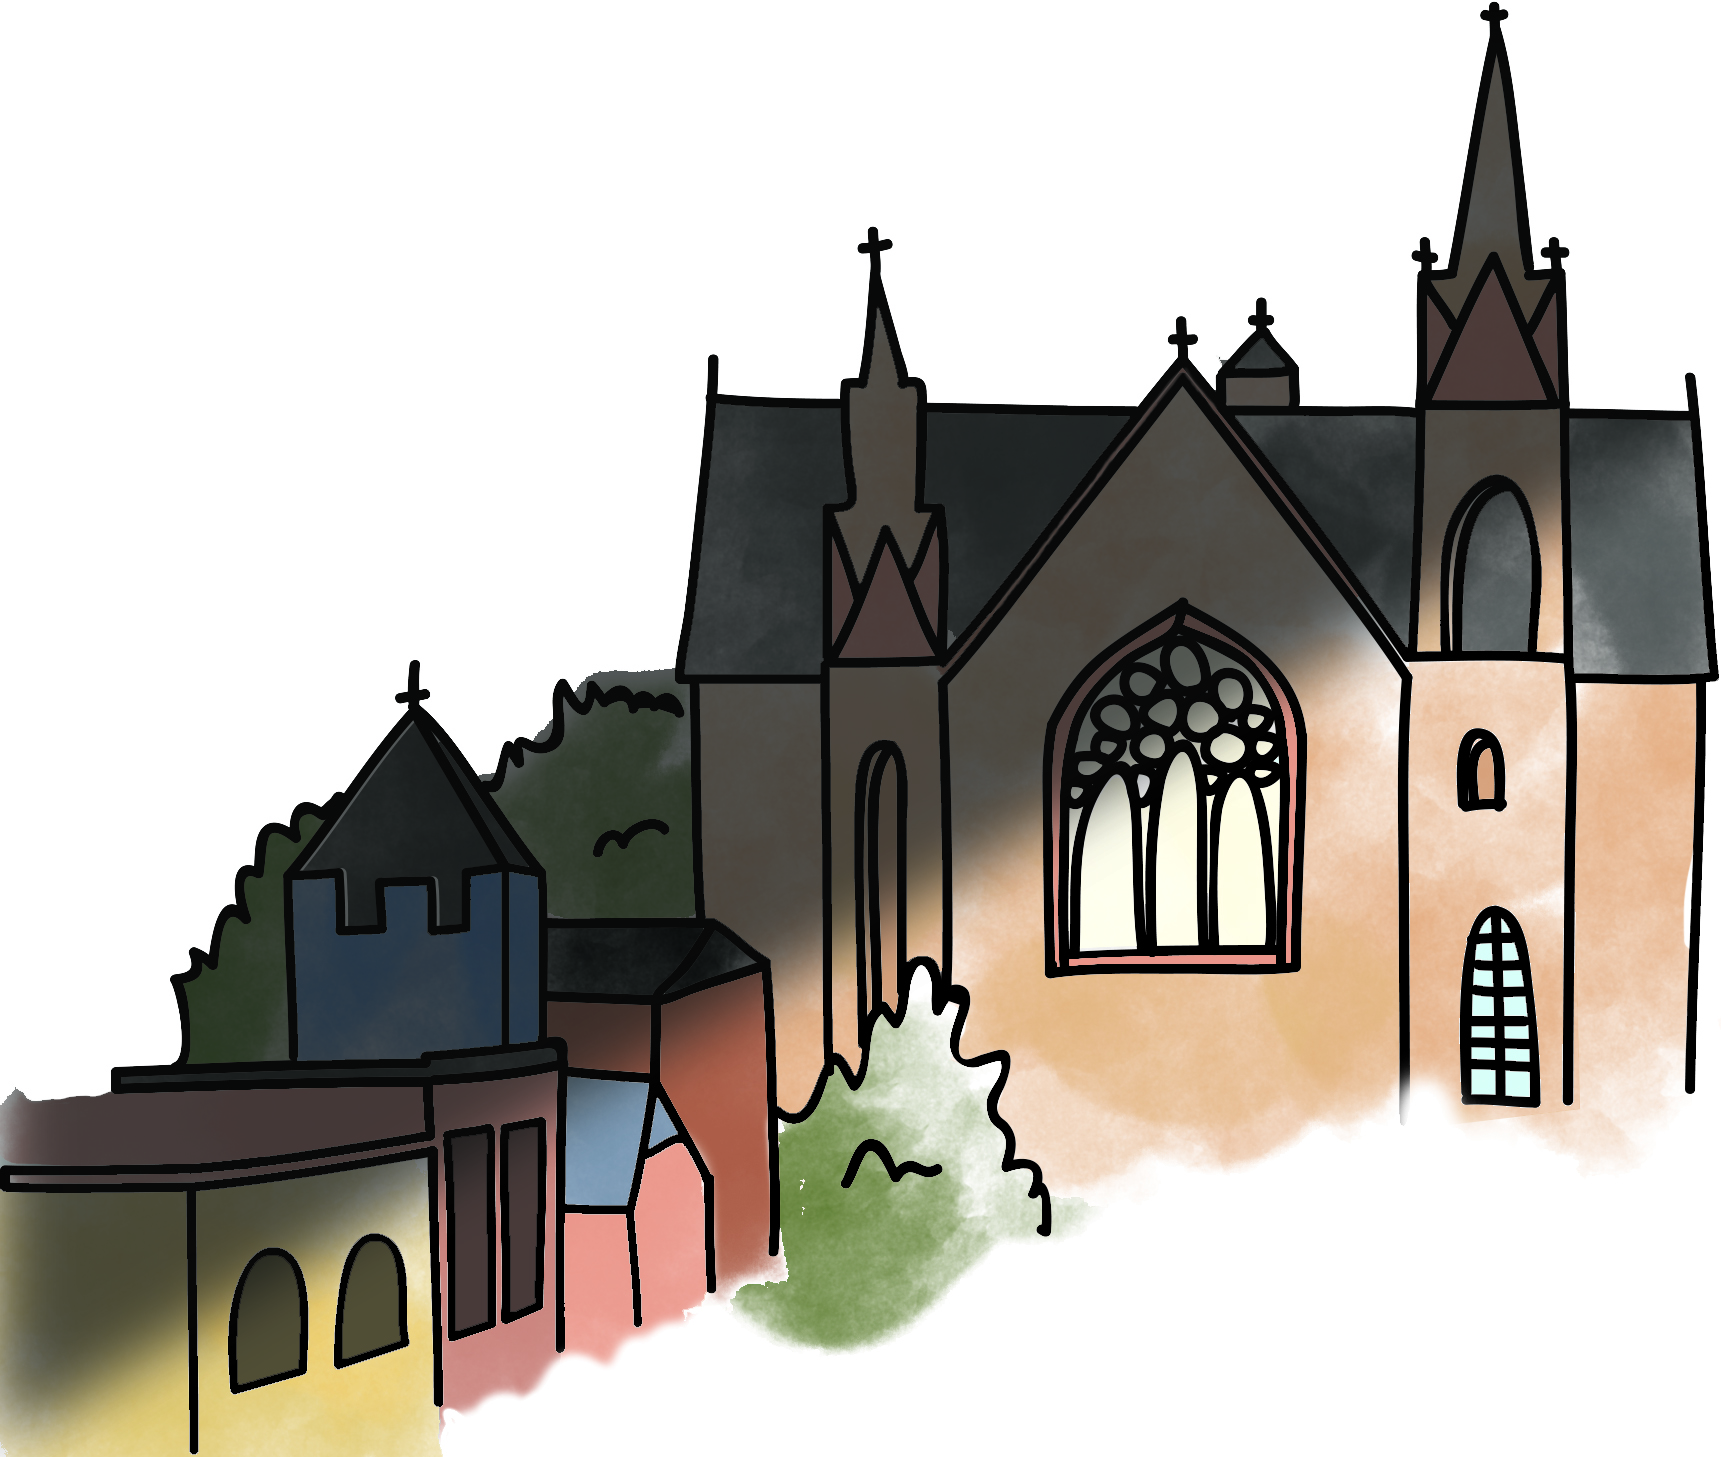 Illustration of a church within a small town.